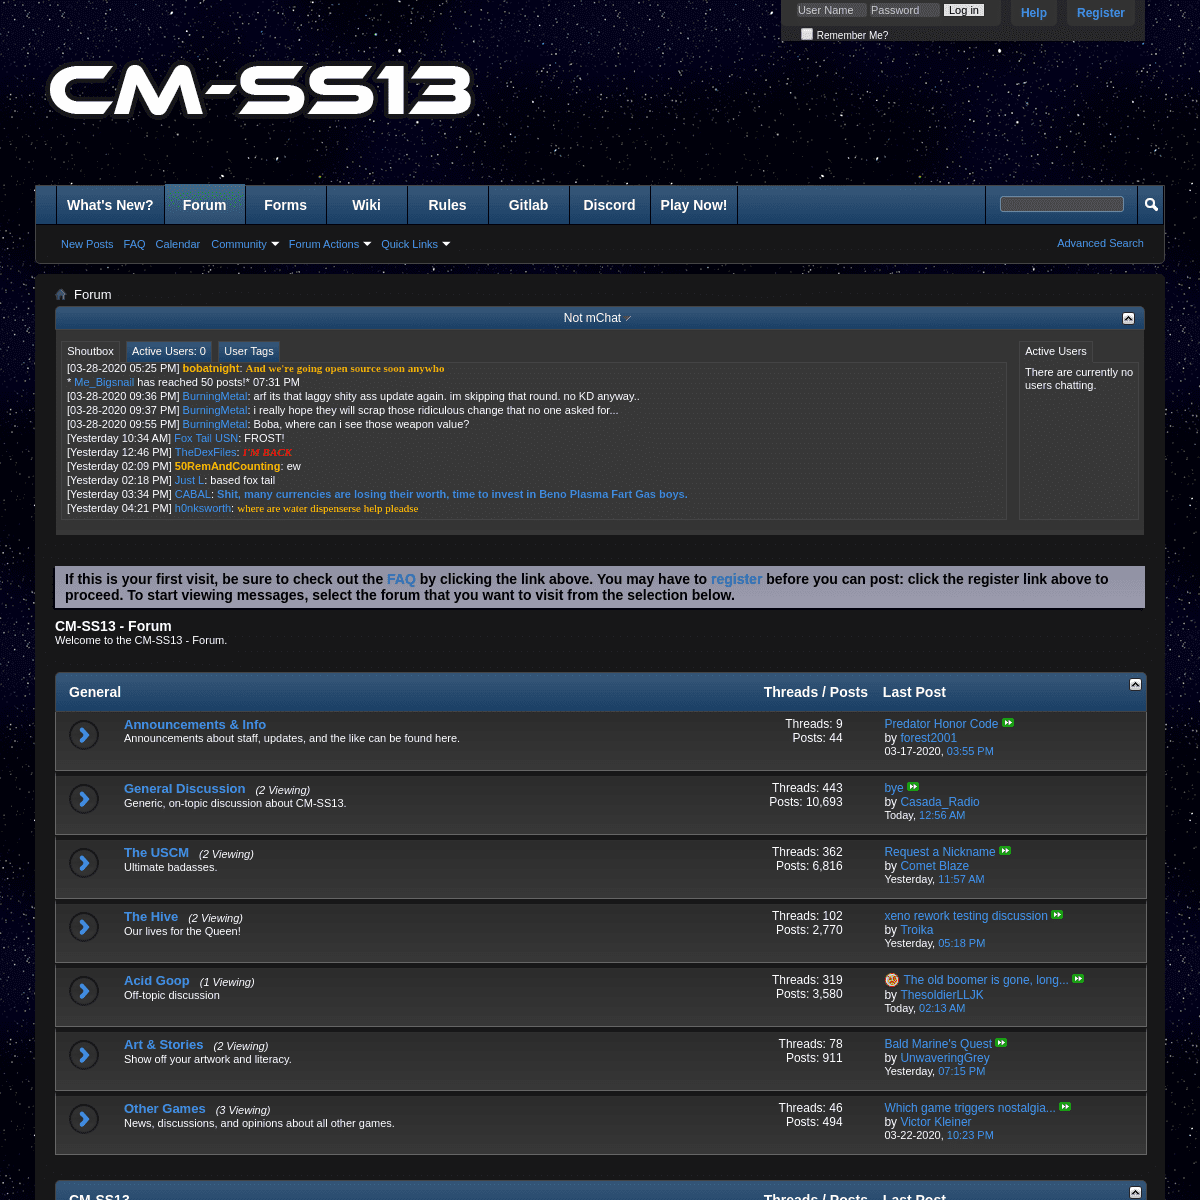 A complete backup of cm-ss13.com